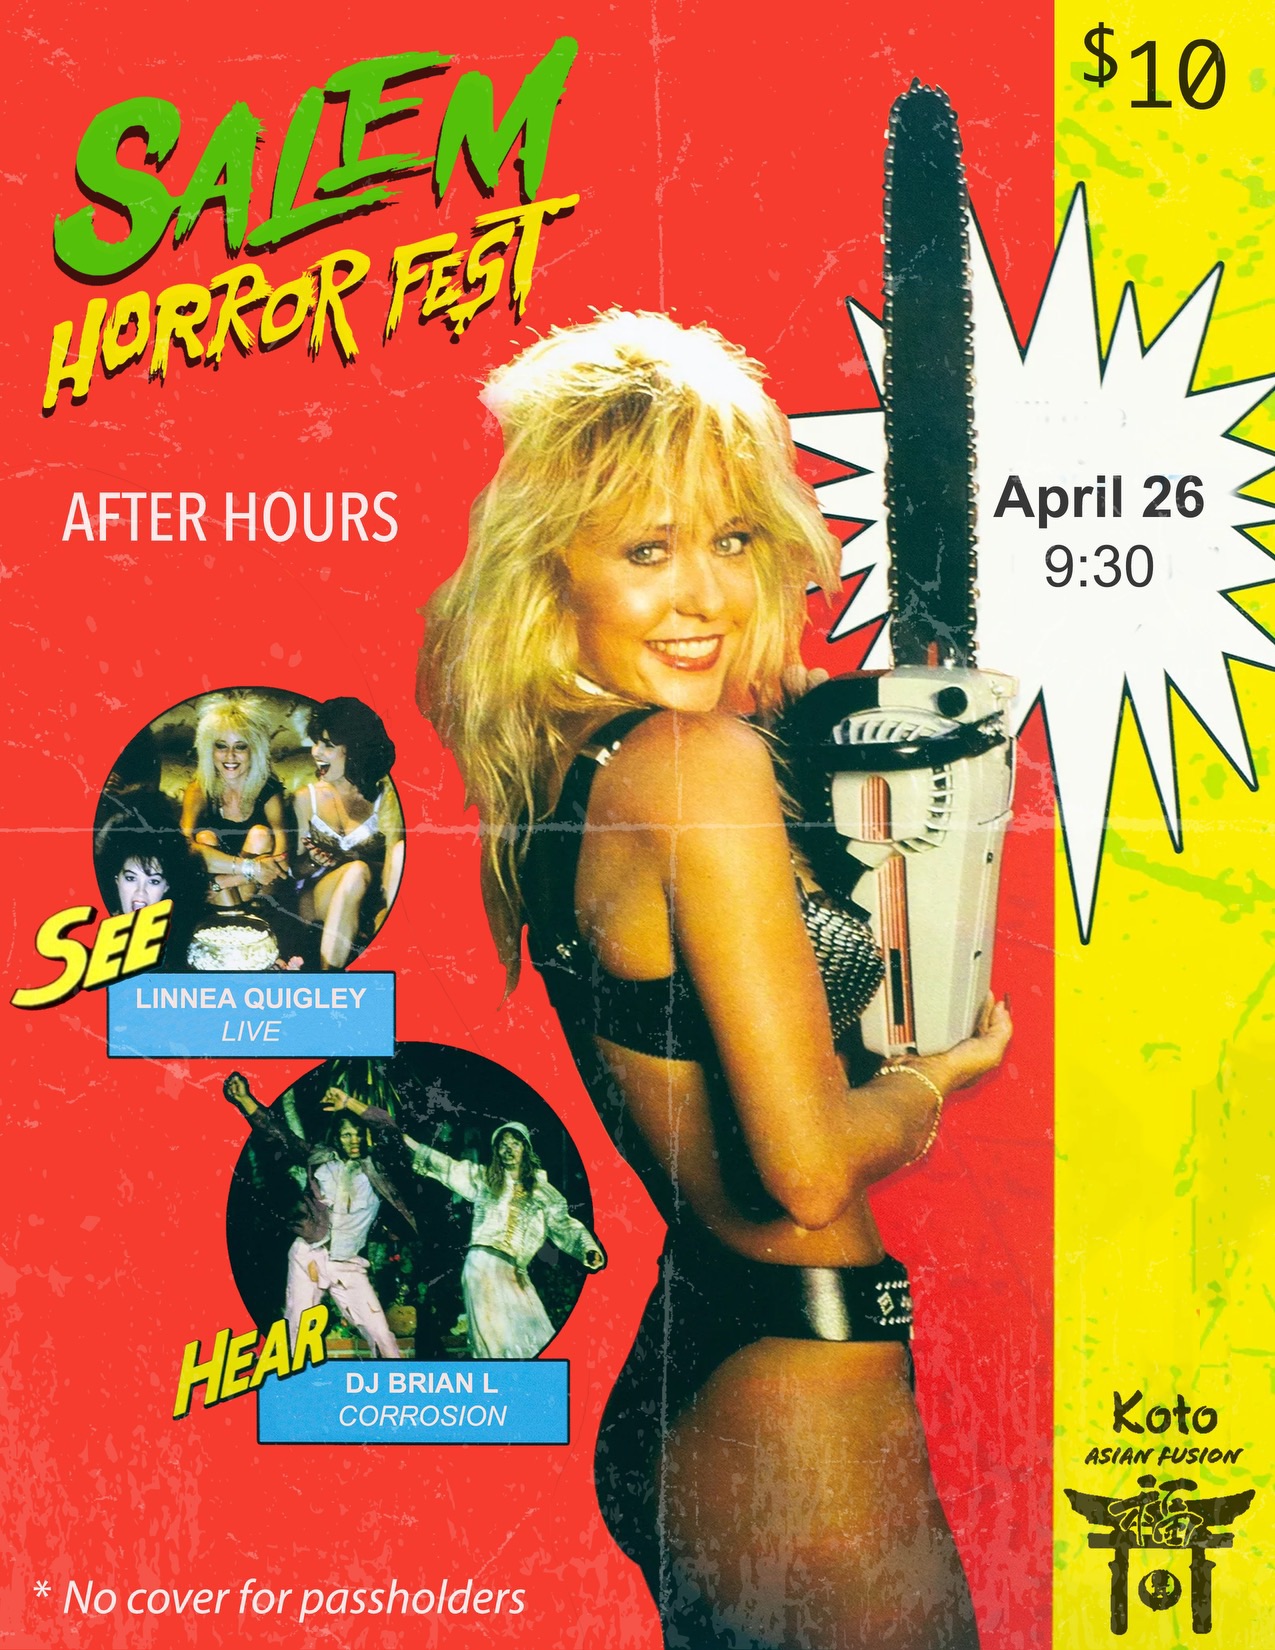 Check out our eye-catching promotional poster for the Salem Horror Fest, highlighting special guest Linnea Quigley. Discover essential event information and pricing details, all presented on a colorful and creative backdrop.